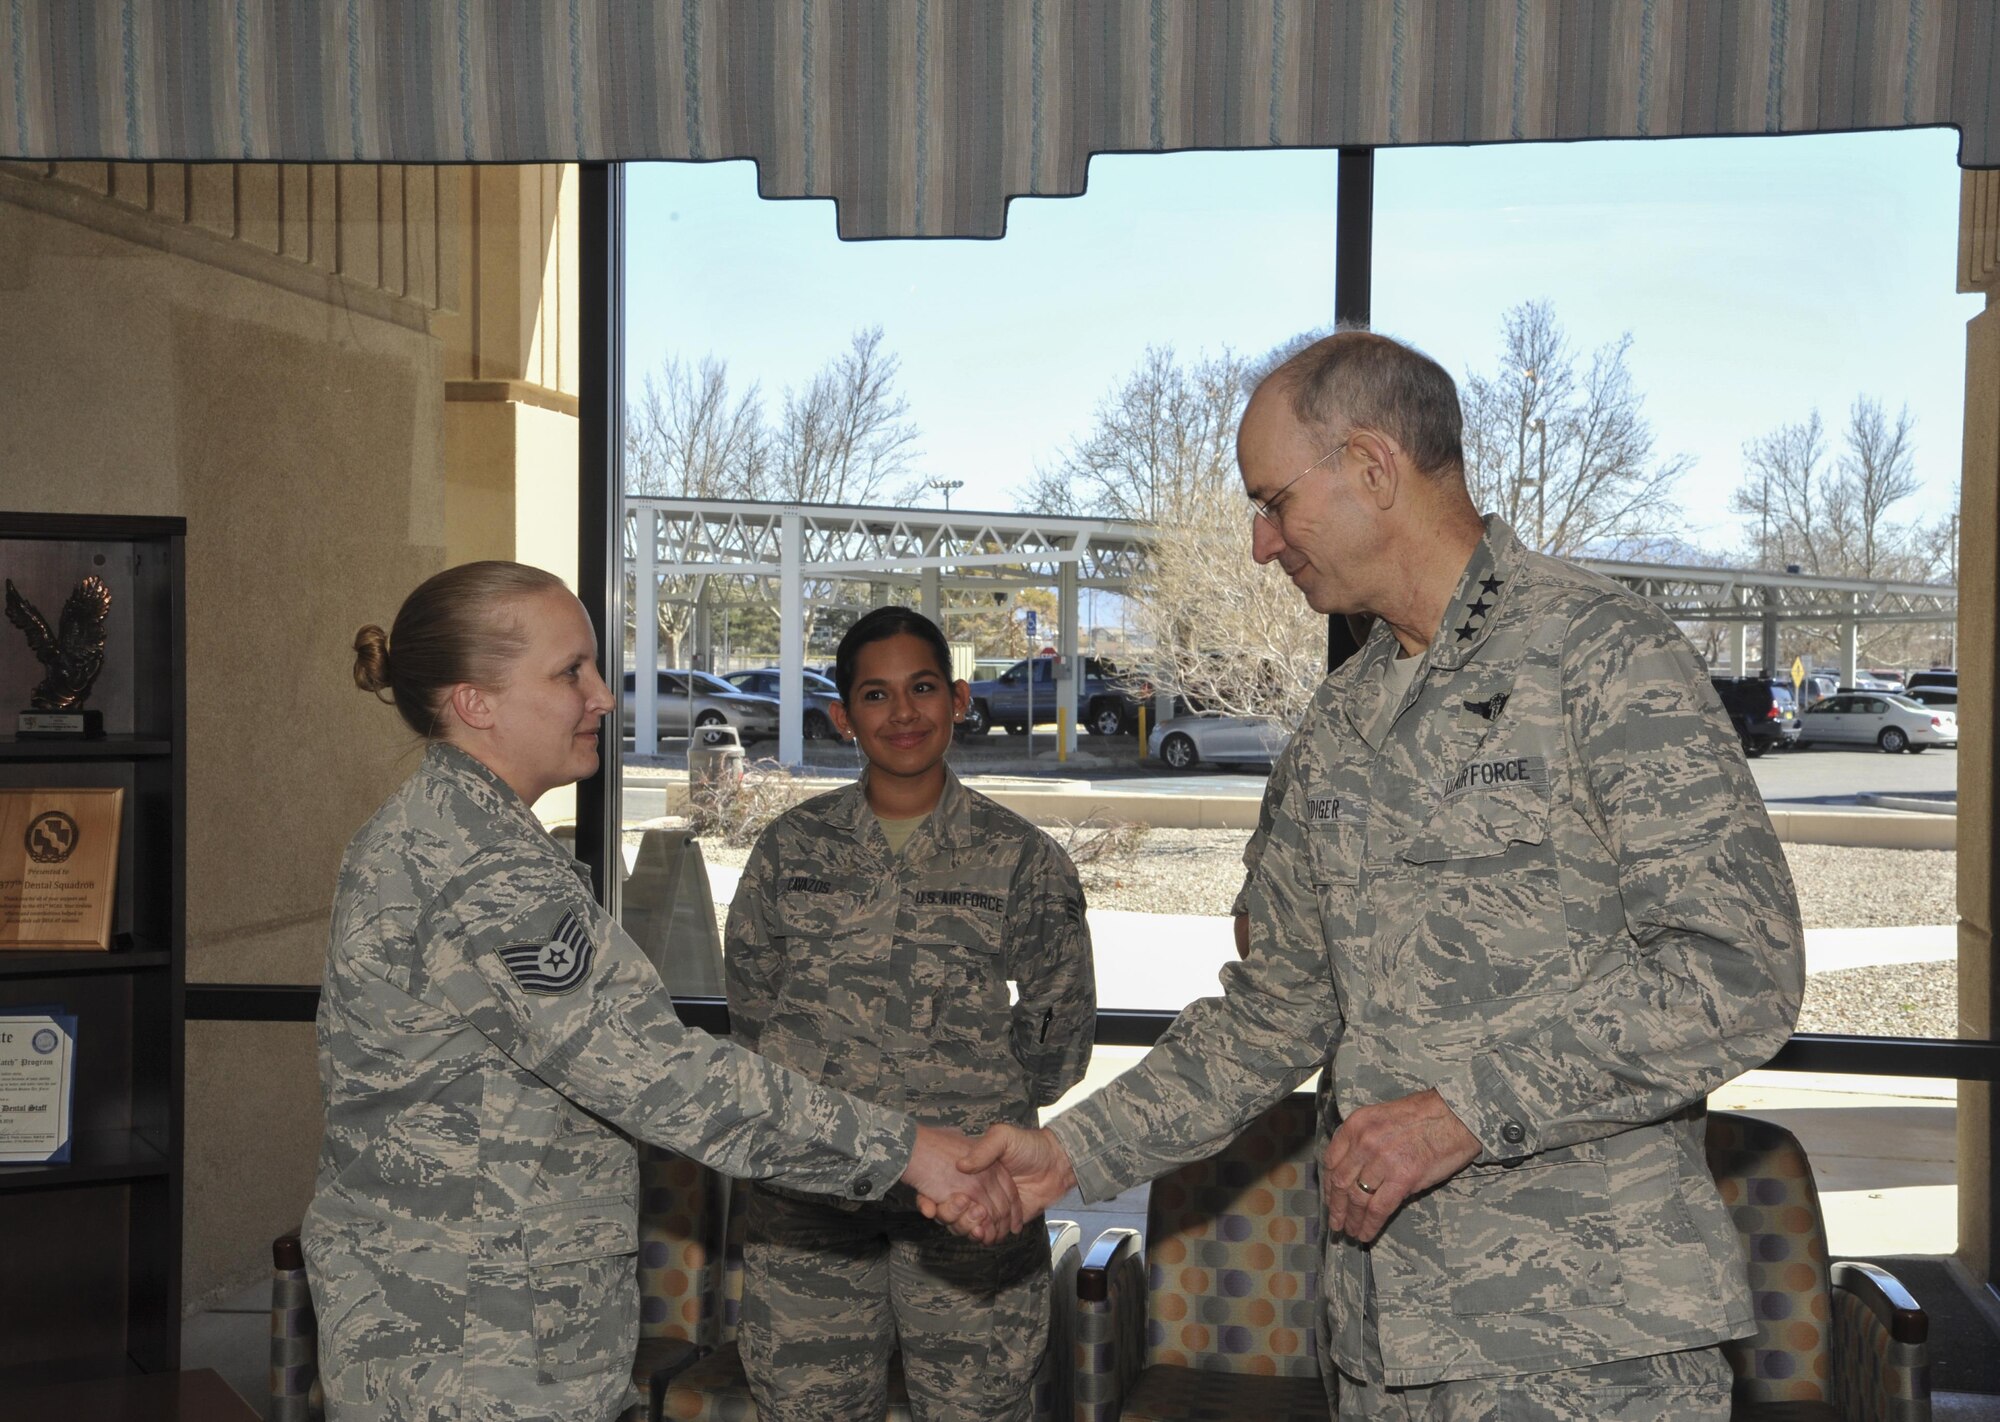 Lt. Gen. Mark Ediger, Surgeon General of the Air Force, coins Tech. Sgt. Tanya Cole, NCOIC of the Dental Squadron during a visit to Kirtland Air Force Base March 2. Ediger recognized several members of the MDG team for being outstanding professionals in their career fields. 